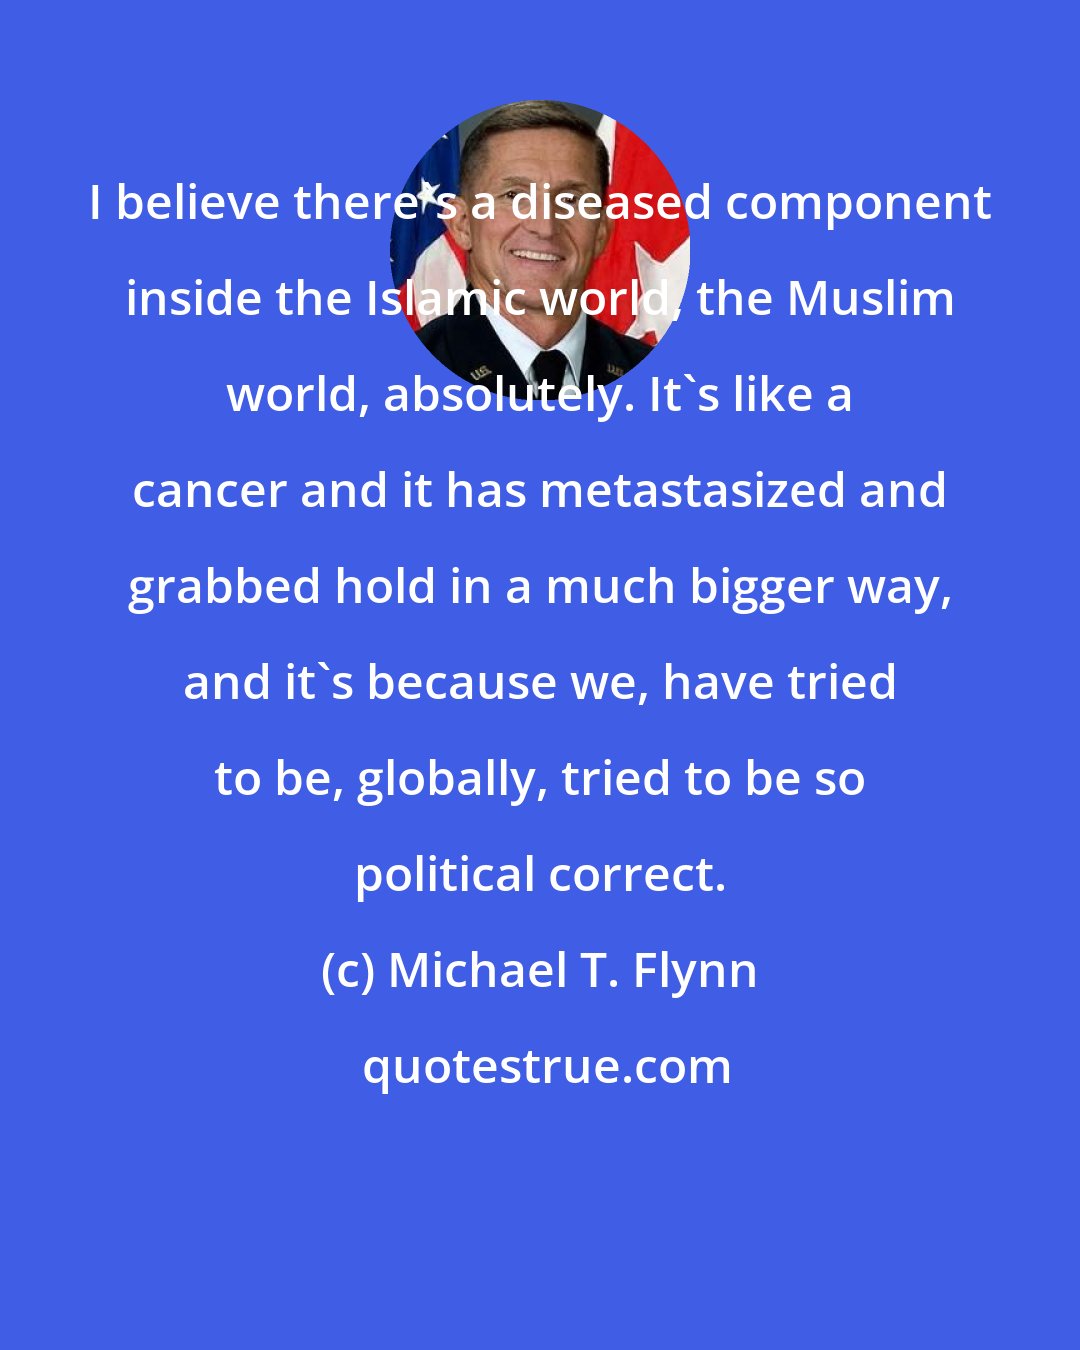 Michael T. Flynn: I believe there's a diseased component inside the Islamic world, the Muslim world, absolutely. It's like a cancer and it has metastasized and grabbed hold in a much bigger way, and it's because we, have tried to be, globally, tried to be so political correct.